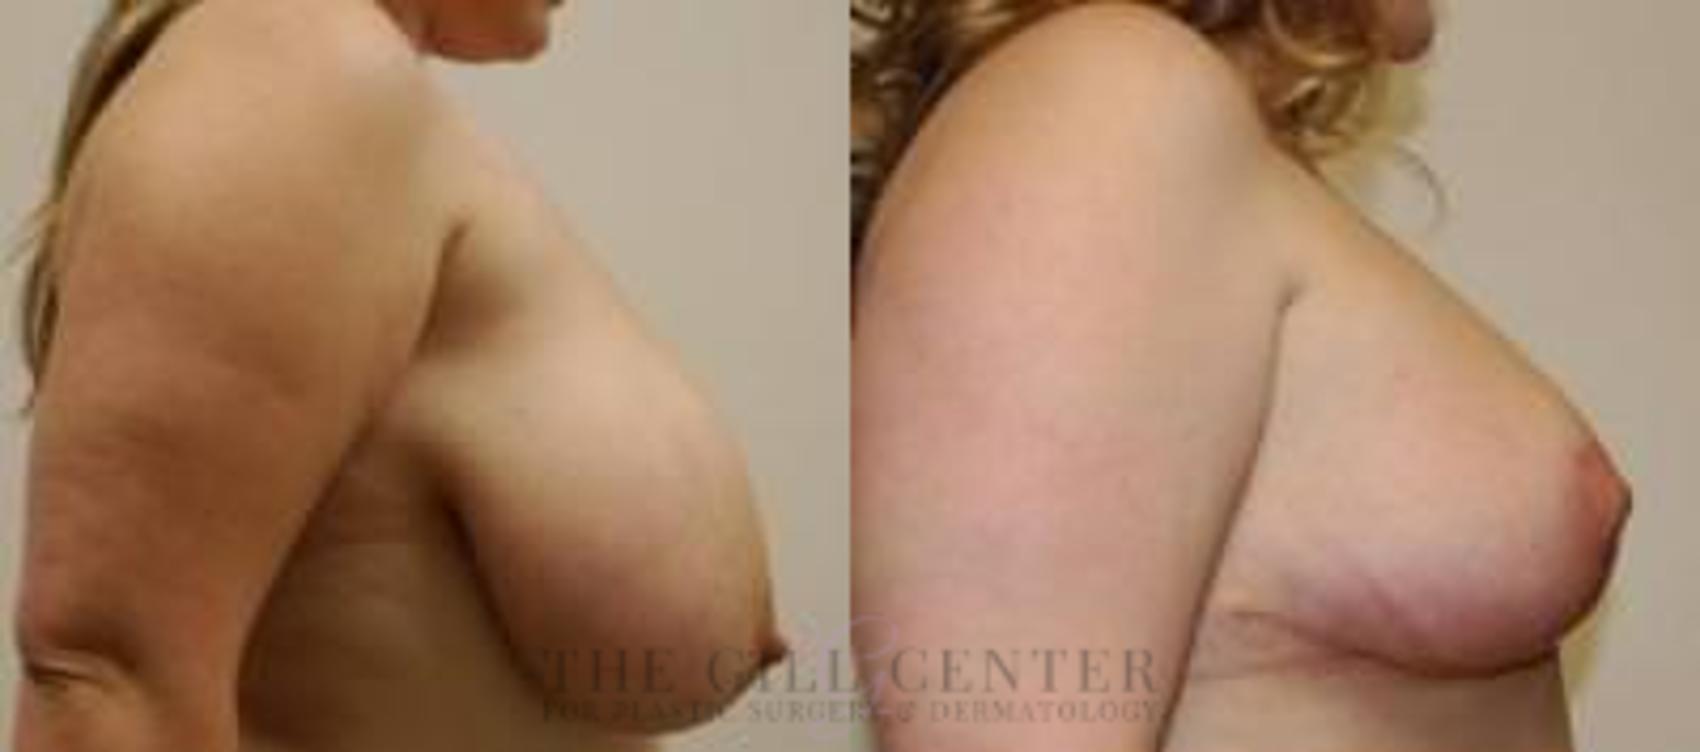 Breast Reduction Case 133 Before & After Right Side | The Woodlands, TX | The Gill Center for Plastic Surgery and Dermatology